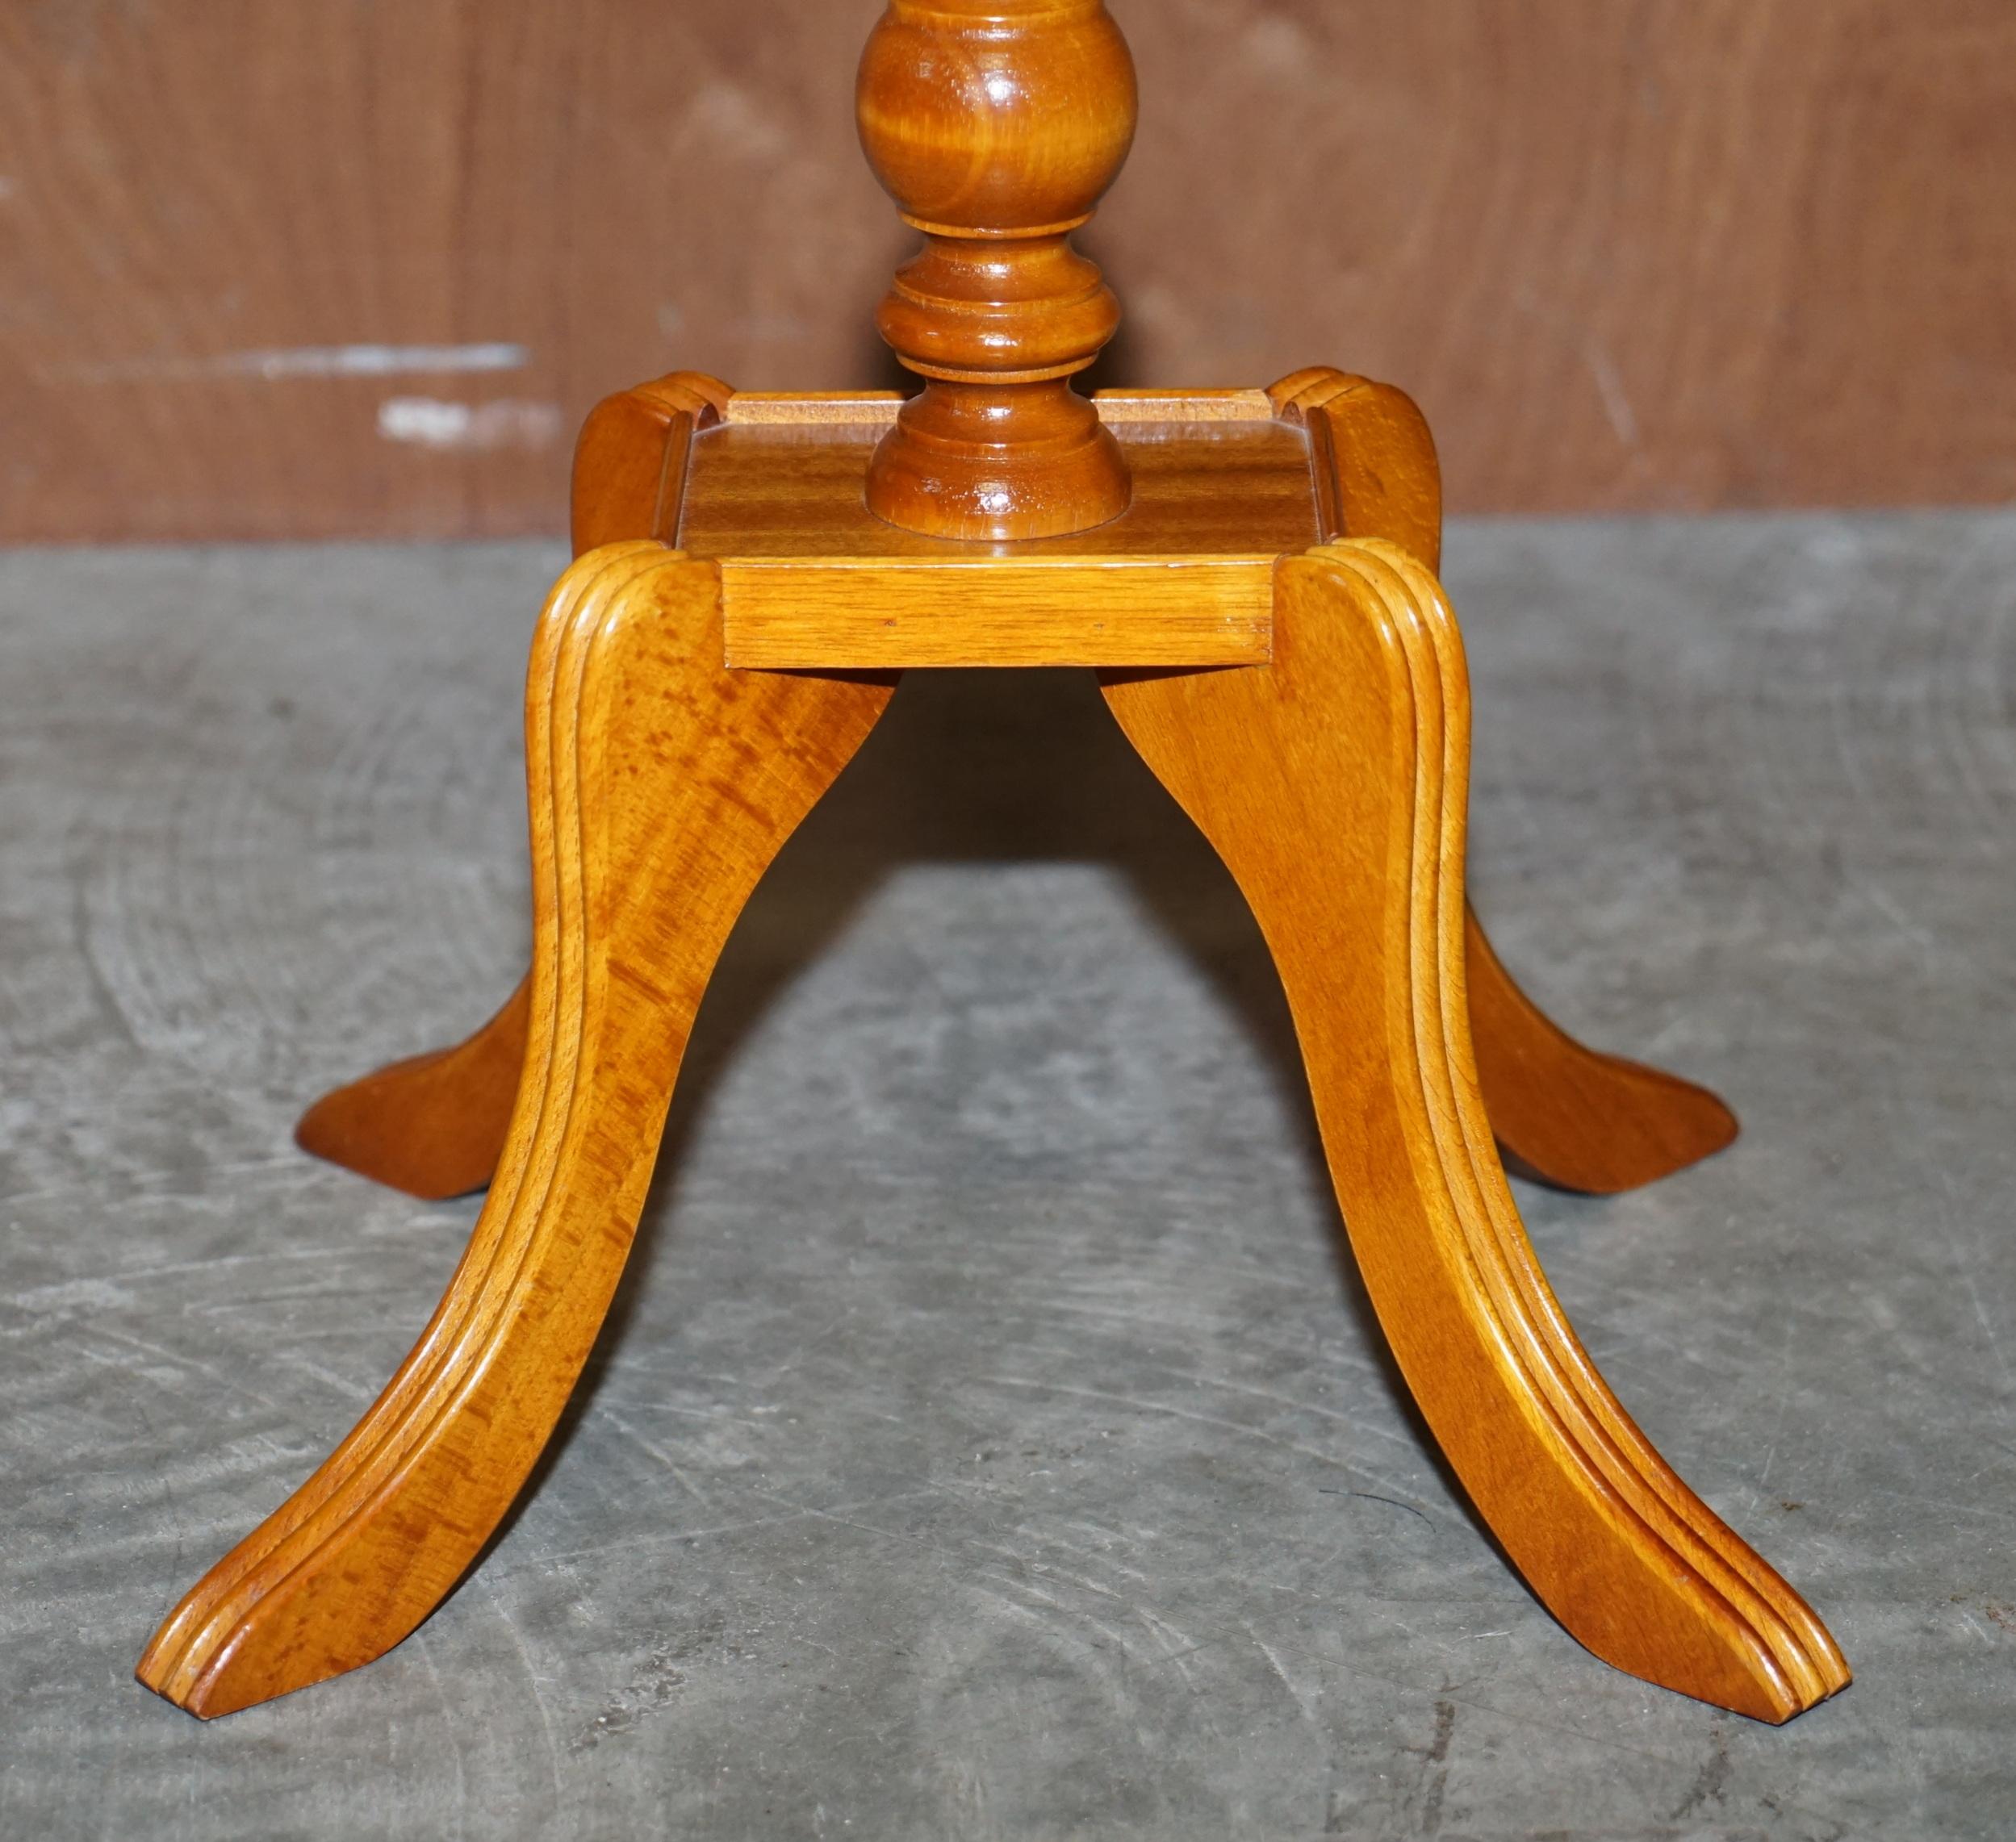 English Sublime Hardwood Wood Beresford & Hicks Side End Lamp Table with Gallery Rail For Sale